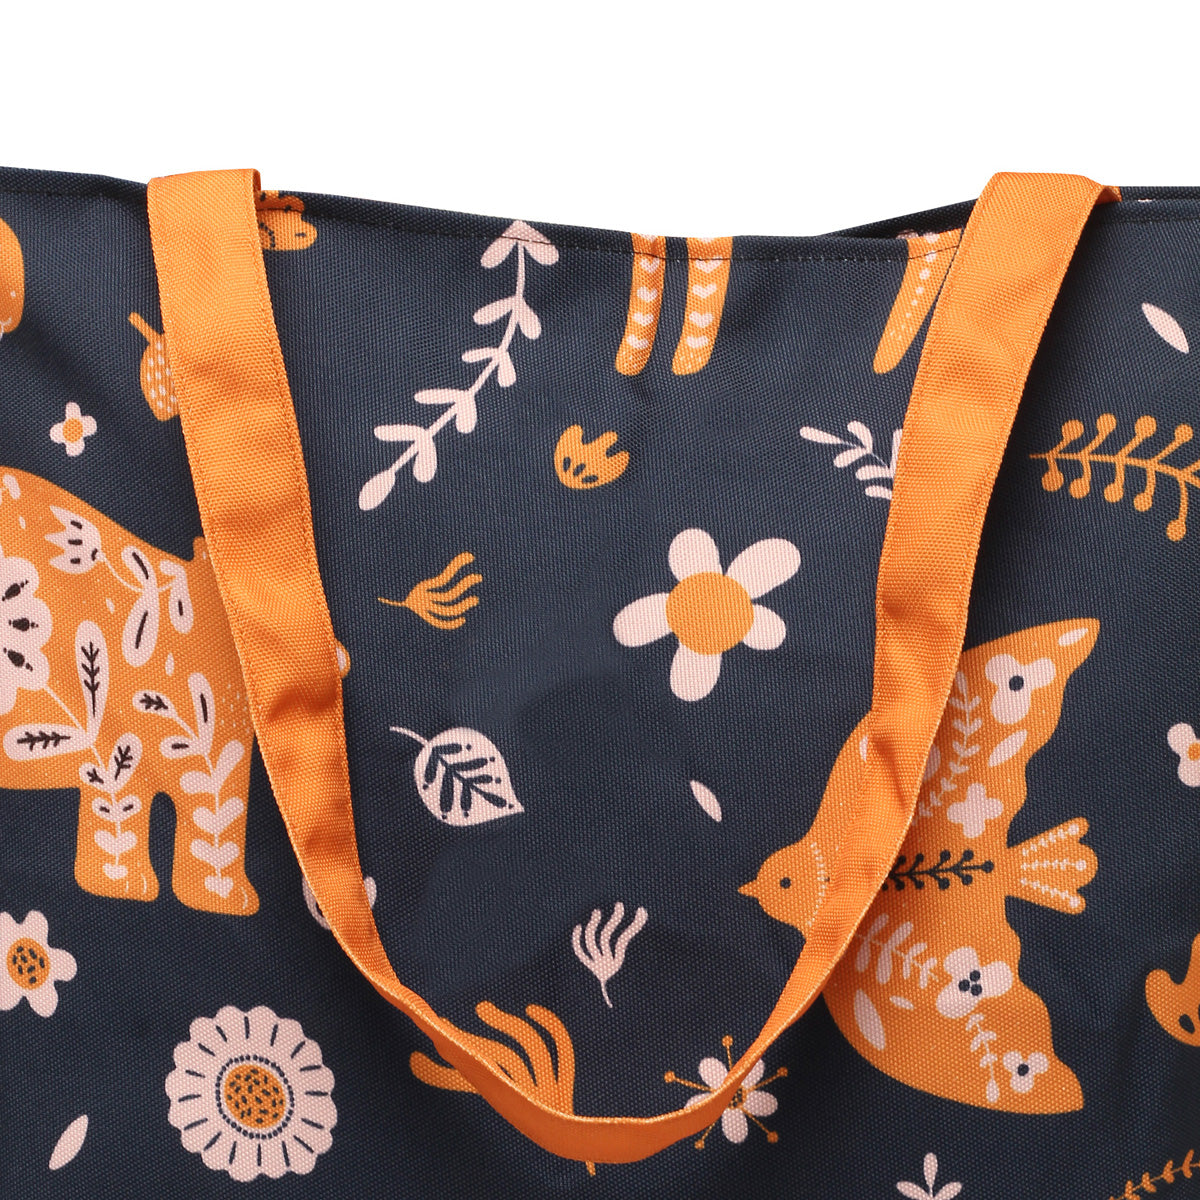 Zoom view of A black tote bag with orange and white animal and plant print designs, featuring deer, fish, and flowers, with orange handles.